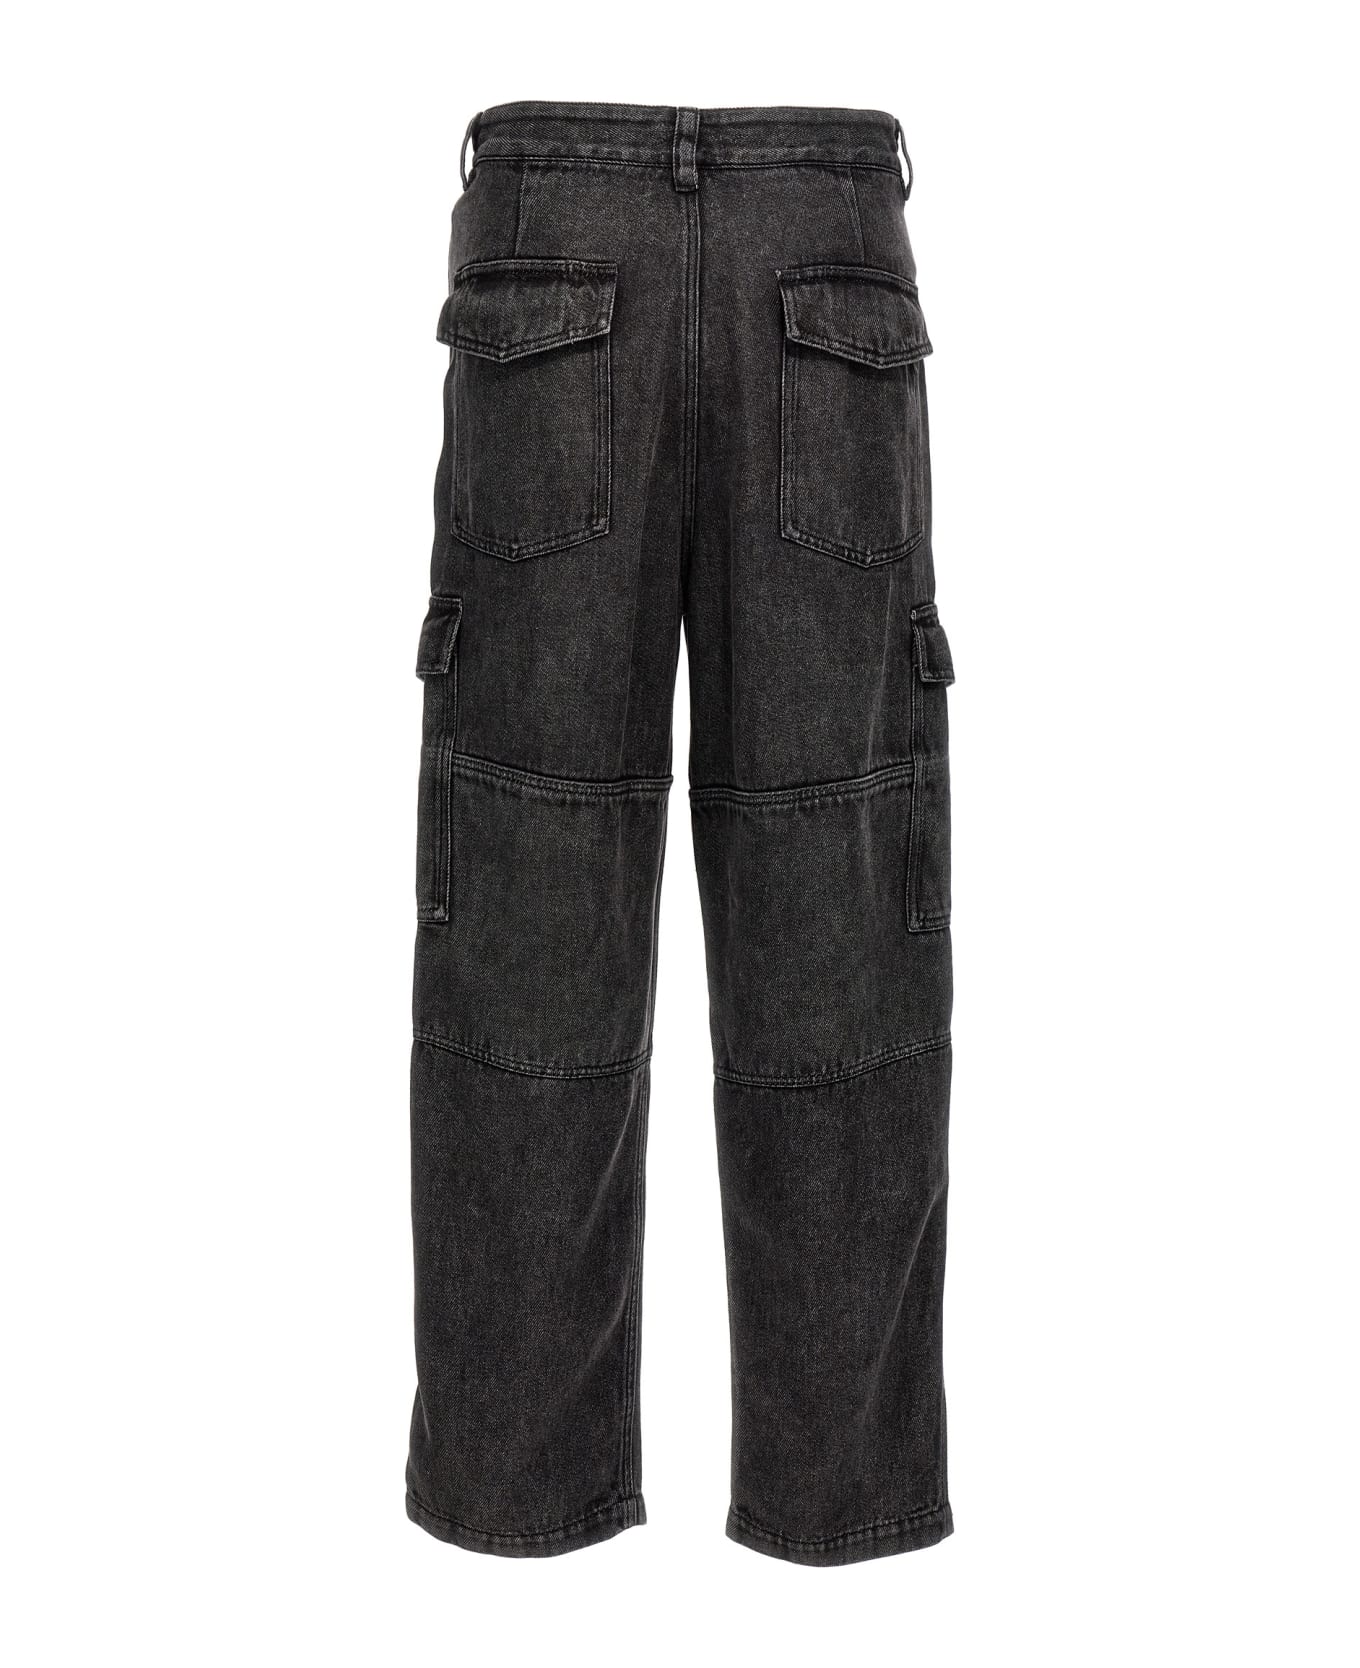 Isabel Marant Terence Cargo Jeans - Gray デニム